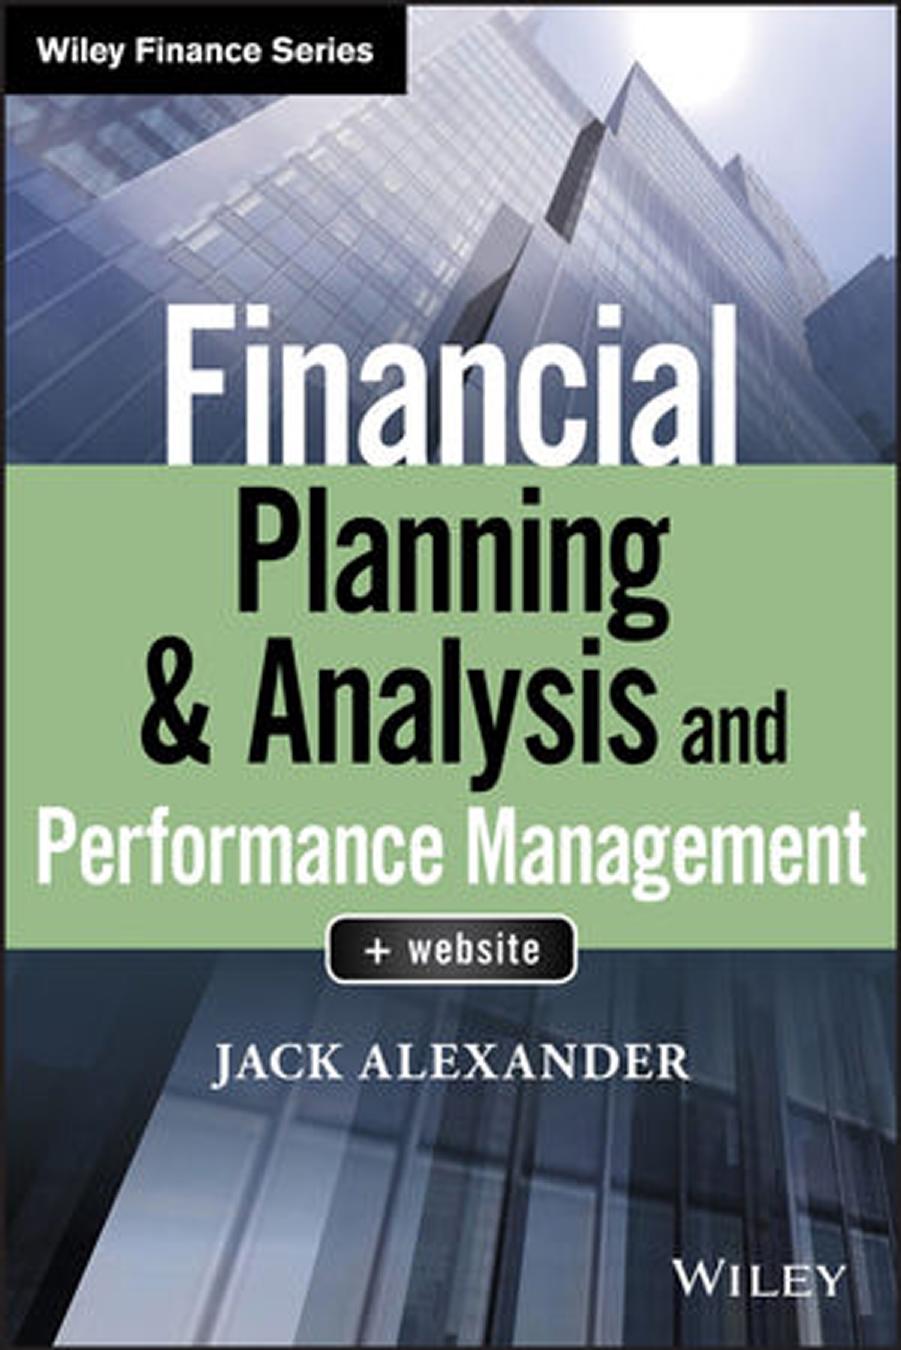 Financial Planning & Analysis and Performance Management 2018